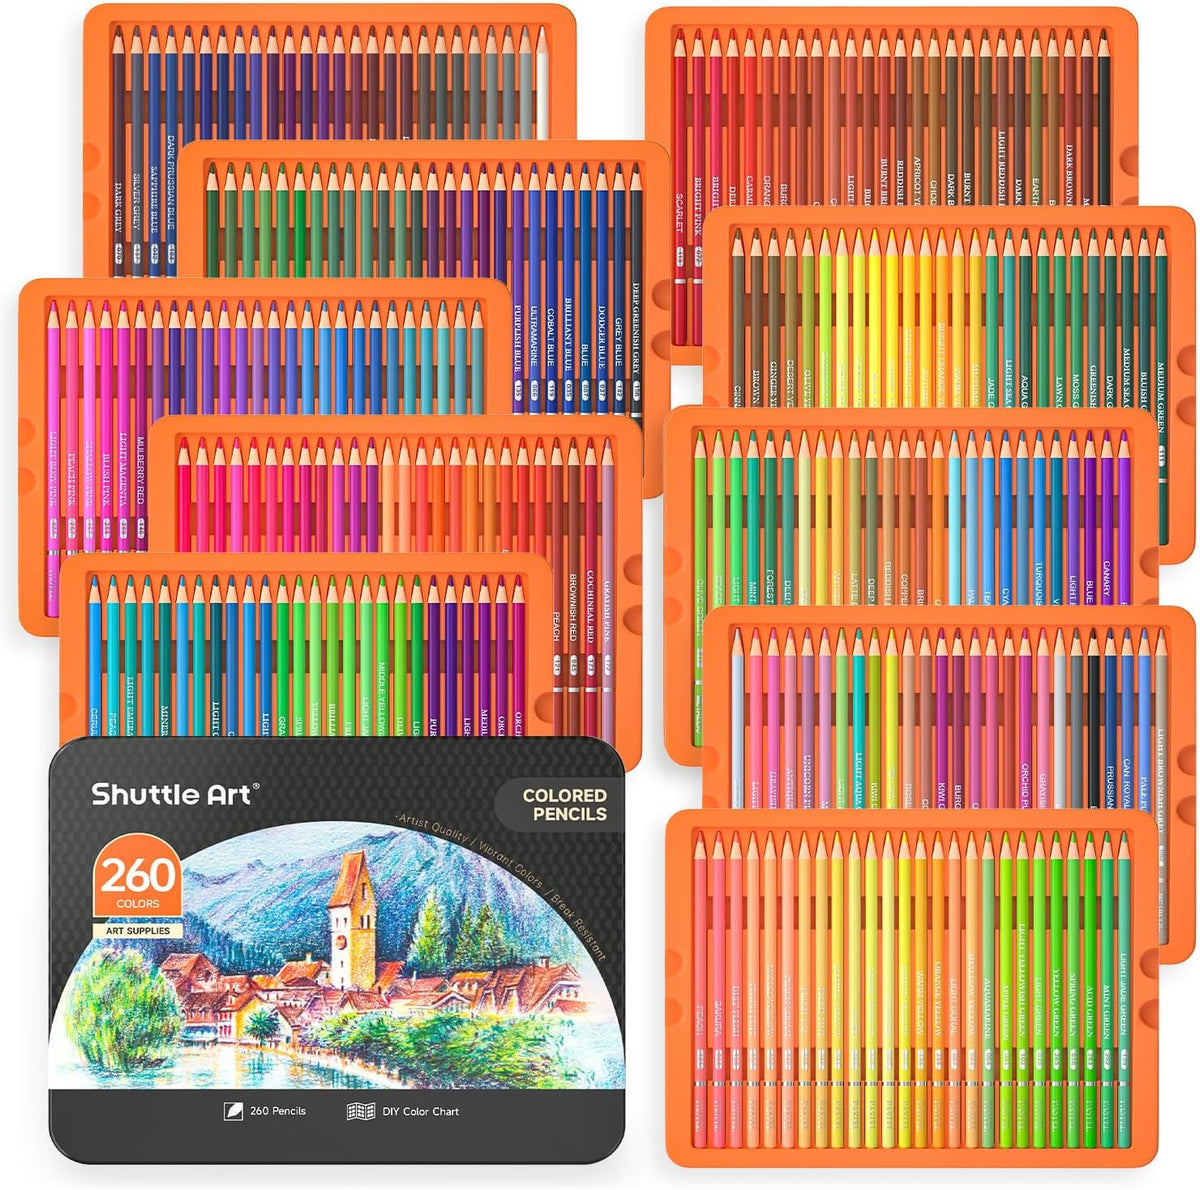 Professional Colored Pencils - Set of 260